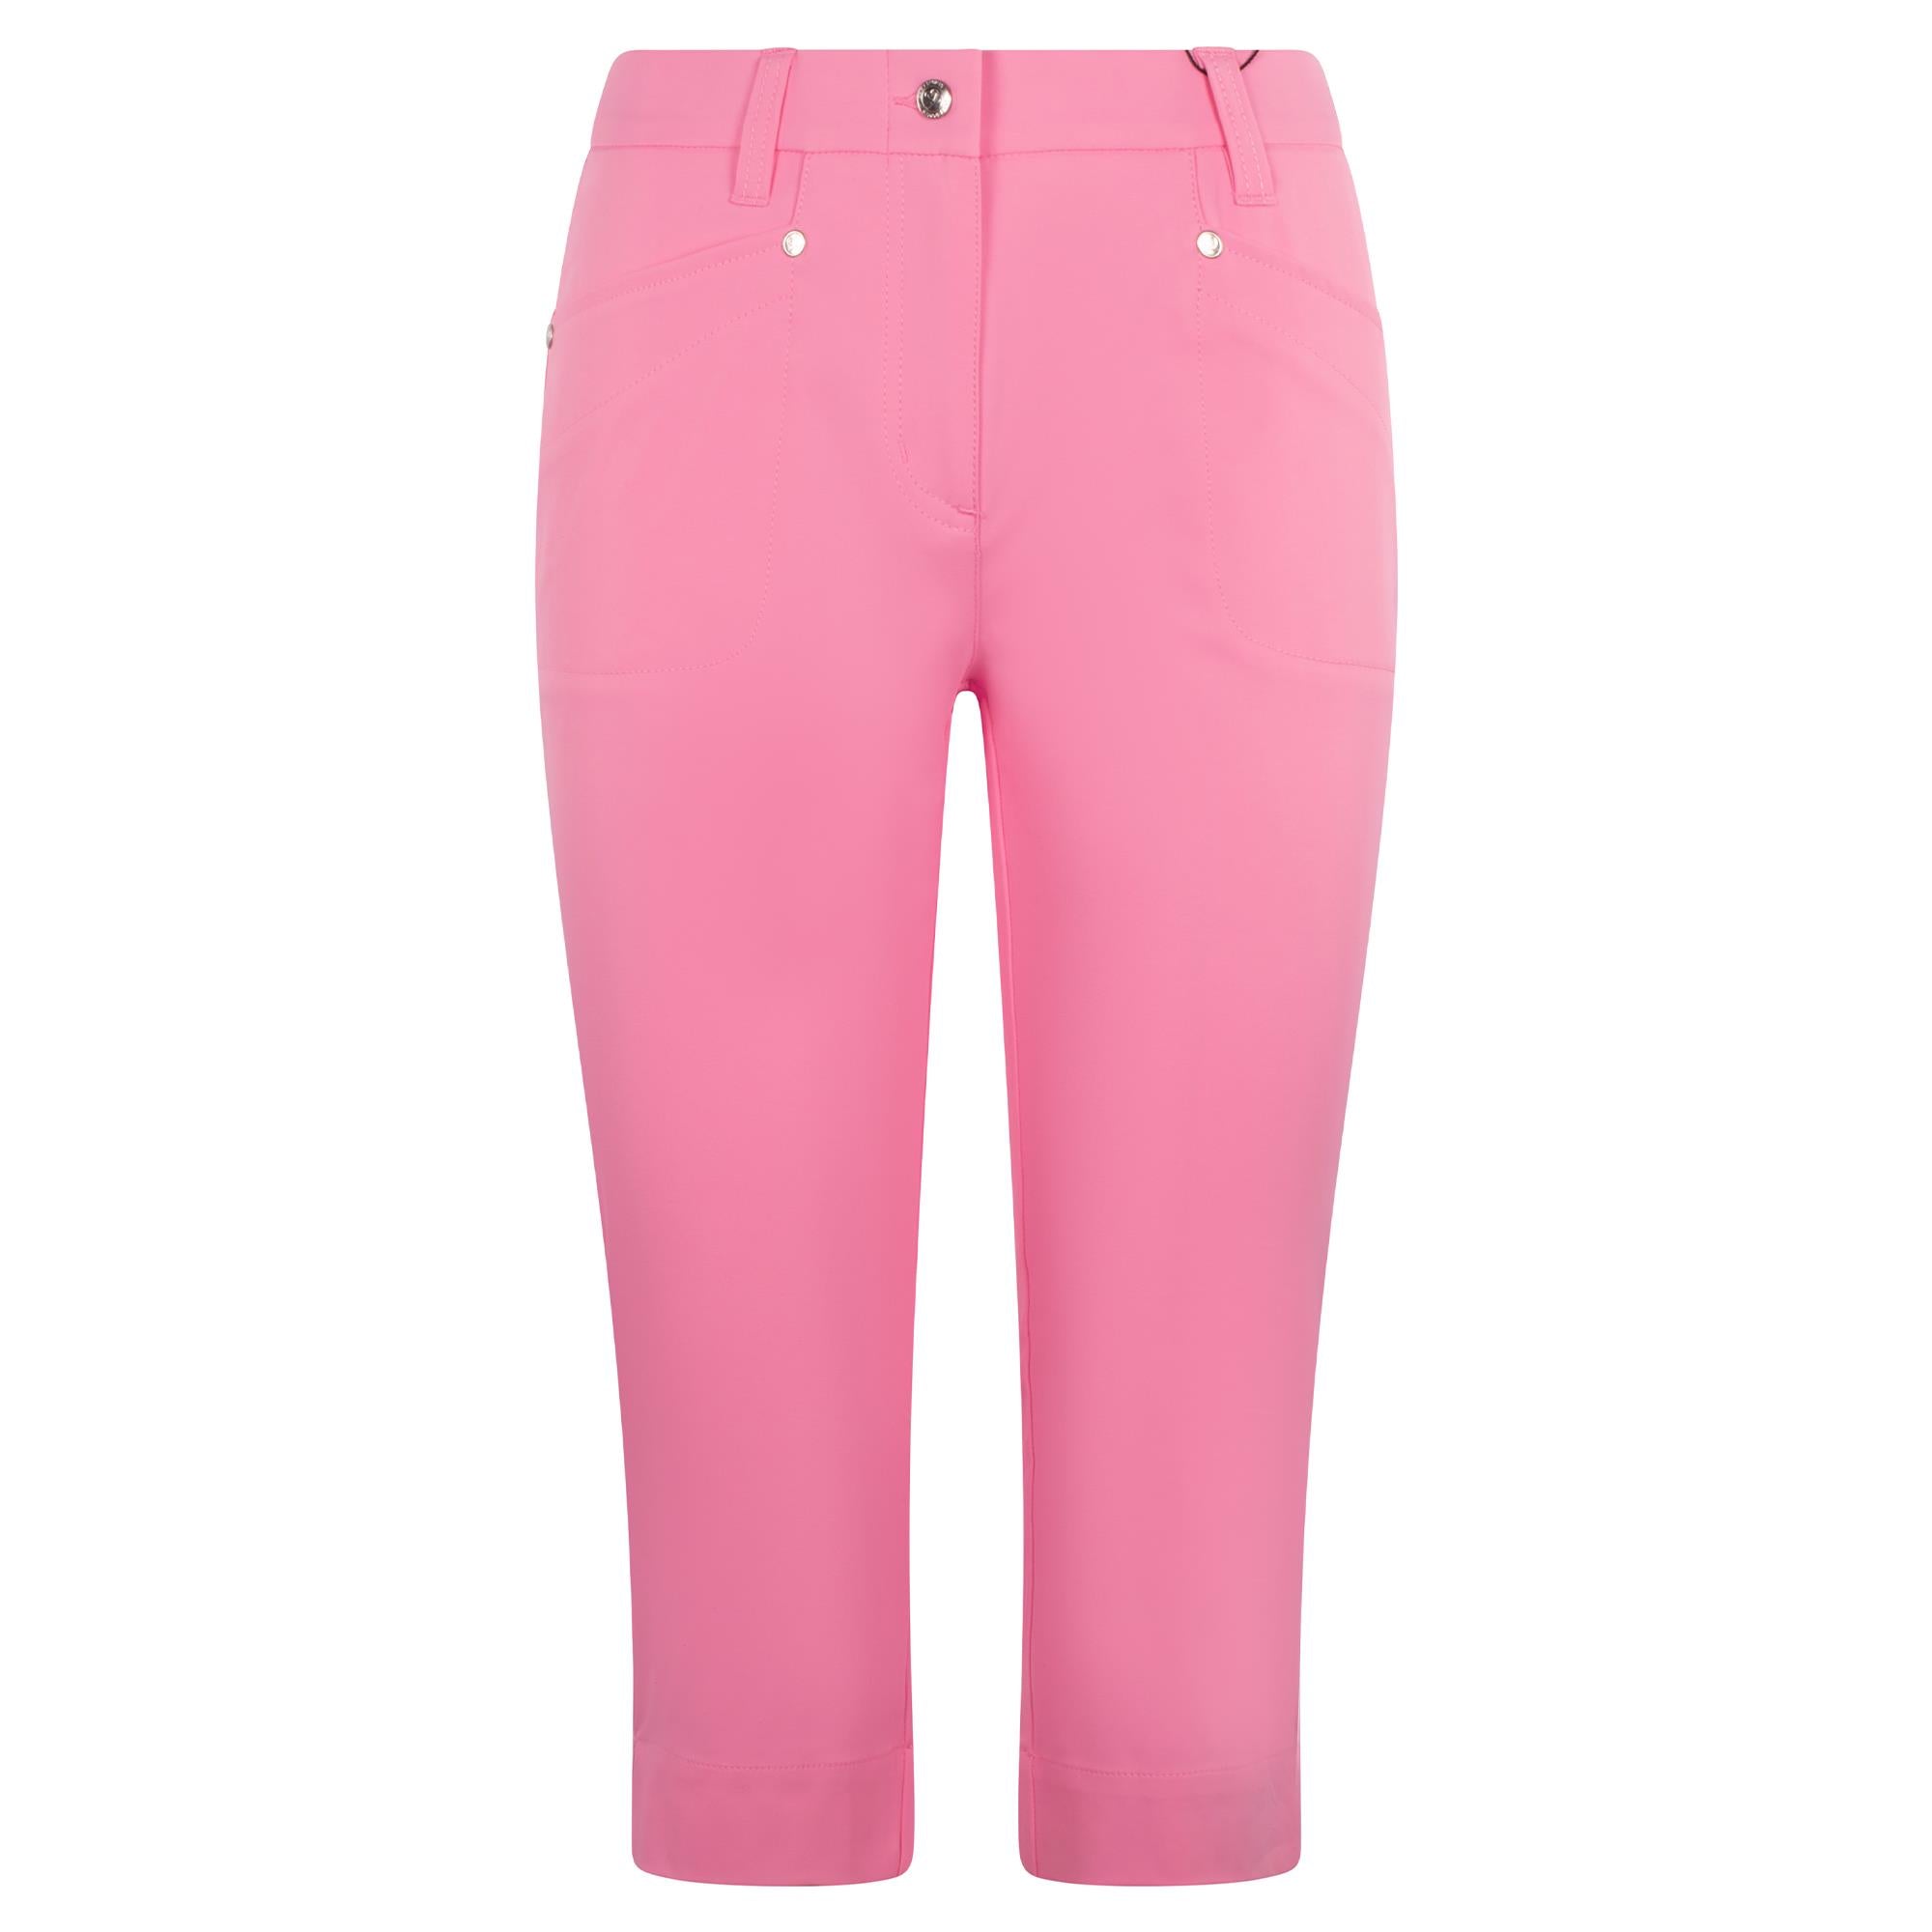 Daily Sports Magic Woman's High Water Pants - Coral